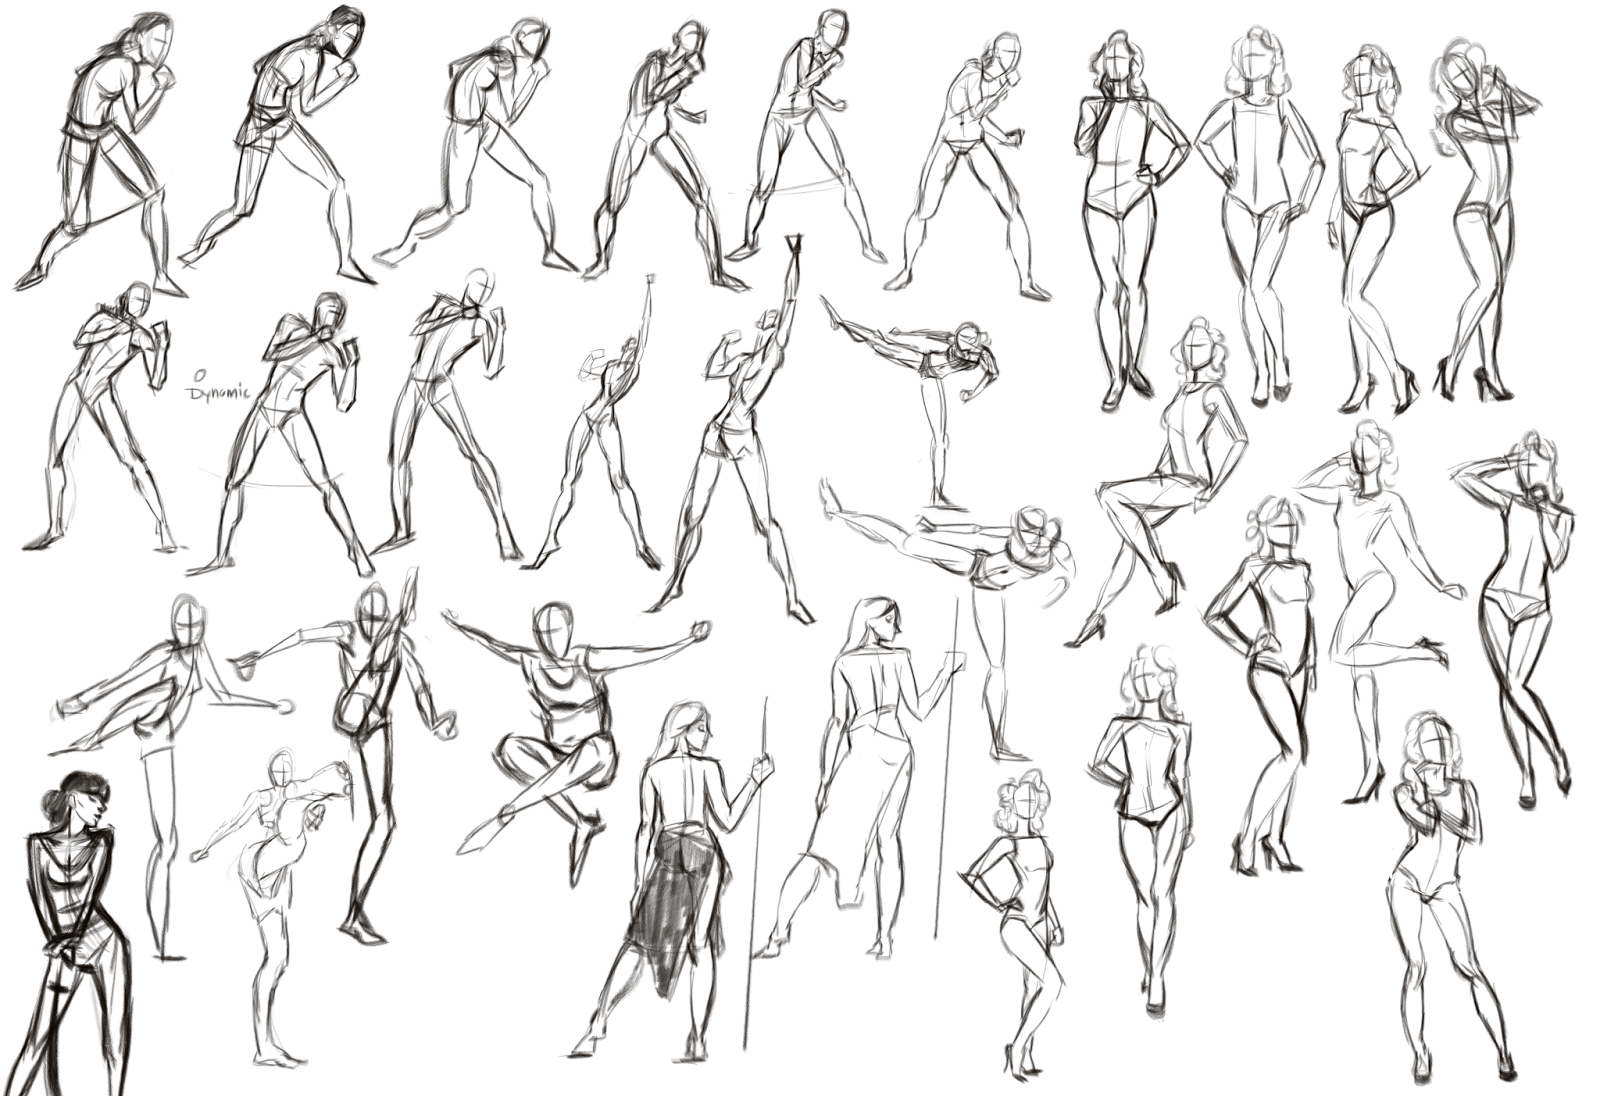 [Image: 2016_05_23_poses.PNG]